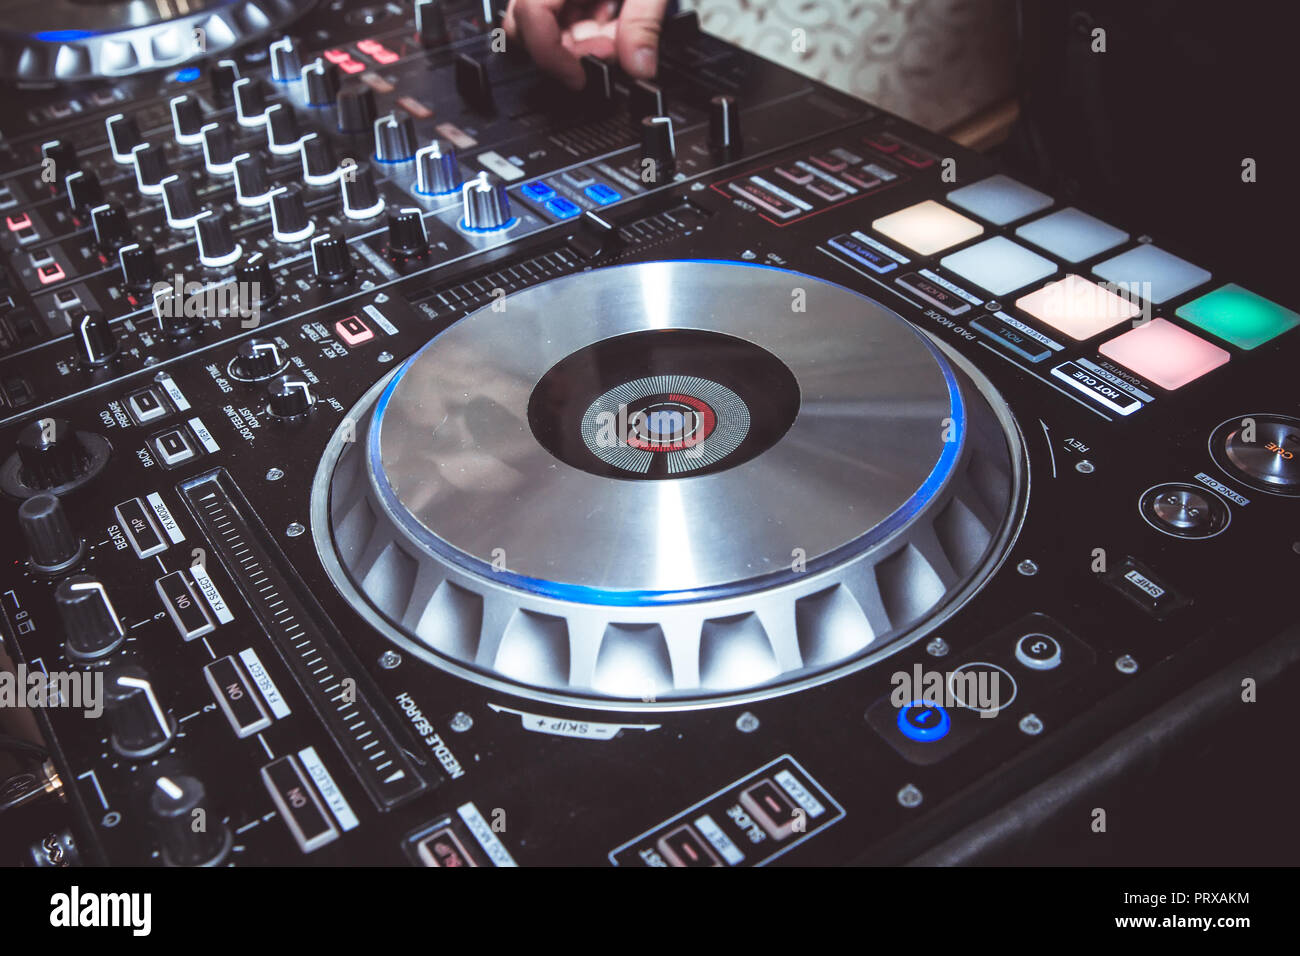 Professional concert dj turntables player device with sound mixer panel and  jog wheel.Club disc jockey stage equipment for playing music on  party.Digital turn table deck for nightclub Stock Photo - Alamy